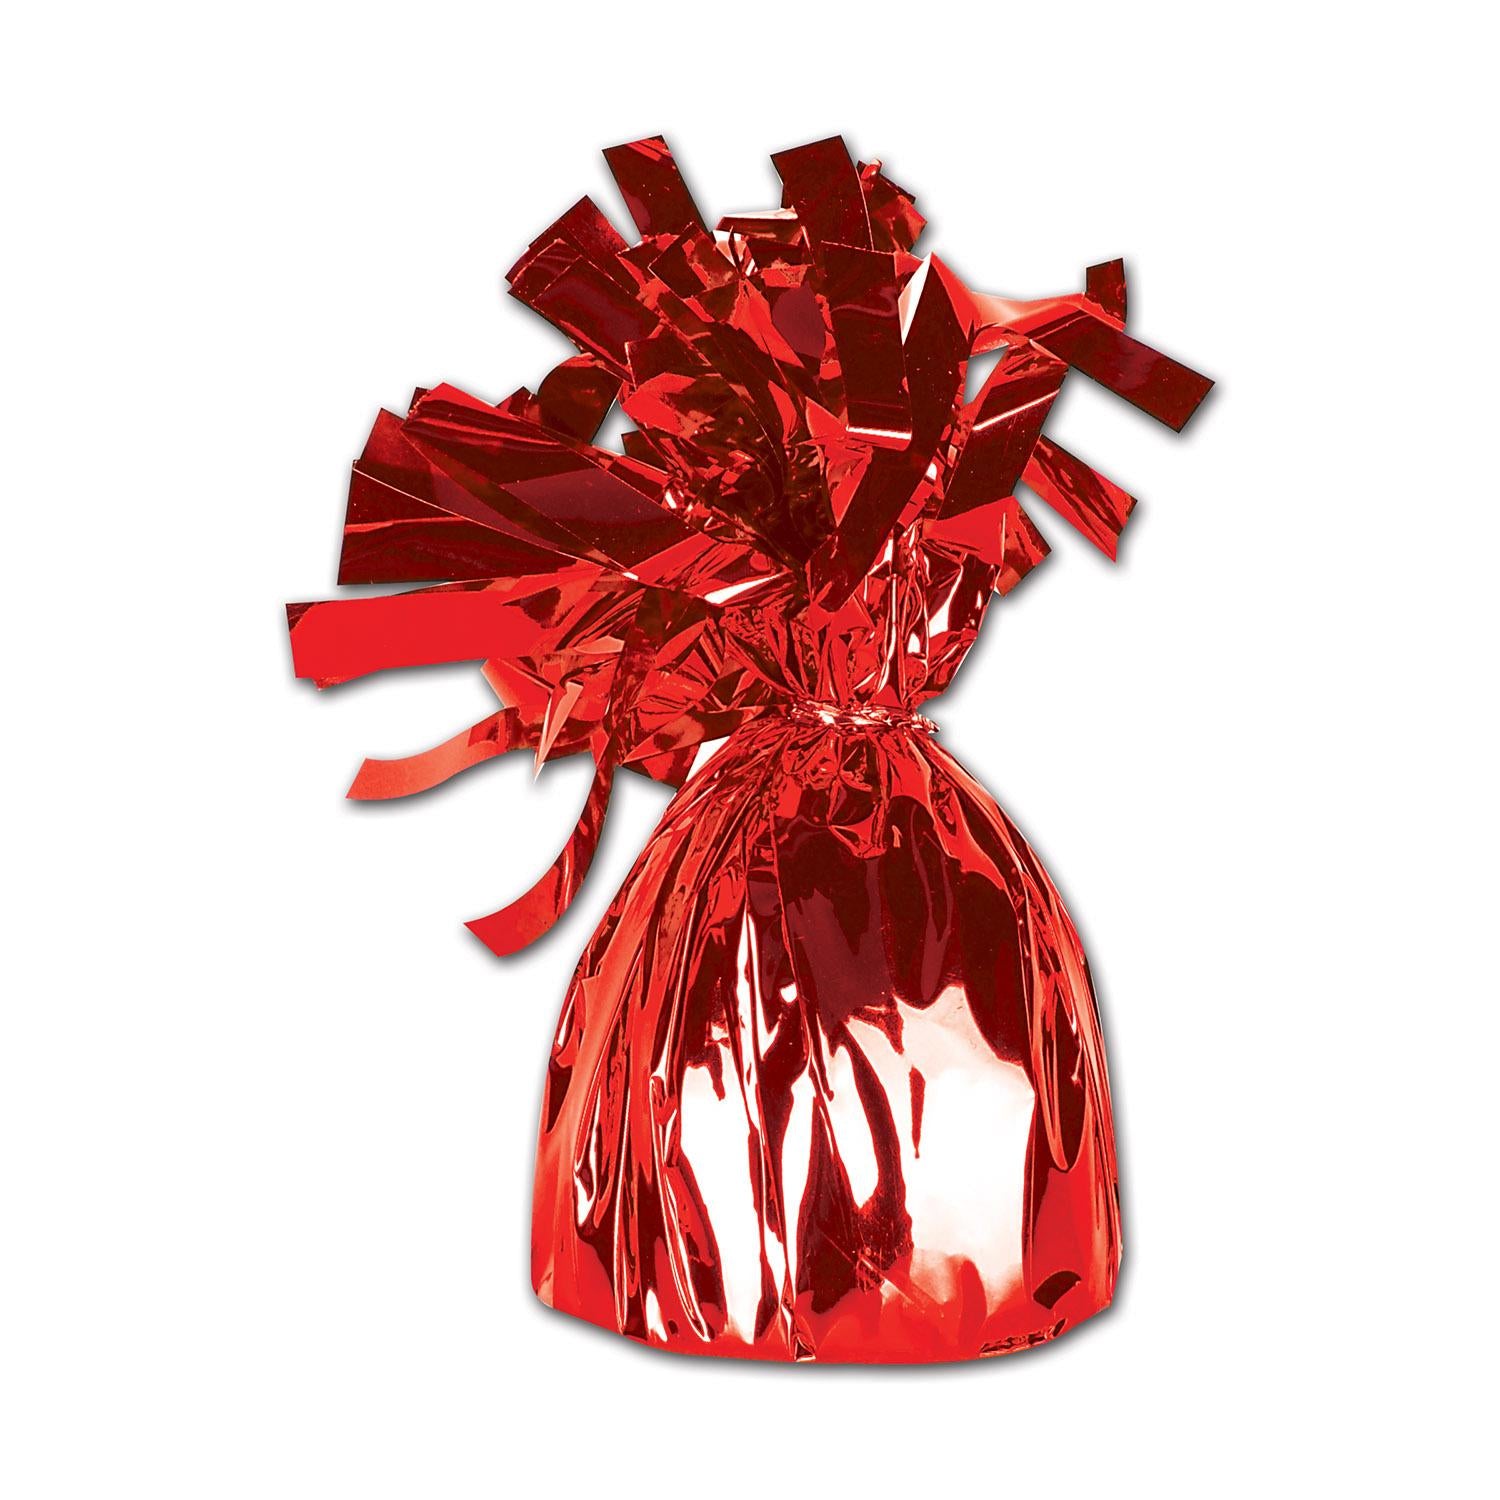 Beistle Metallic Wrapped Party Balloon Weight - red